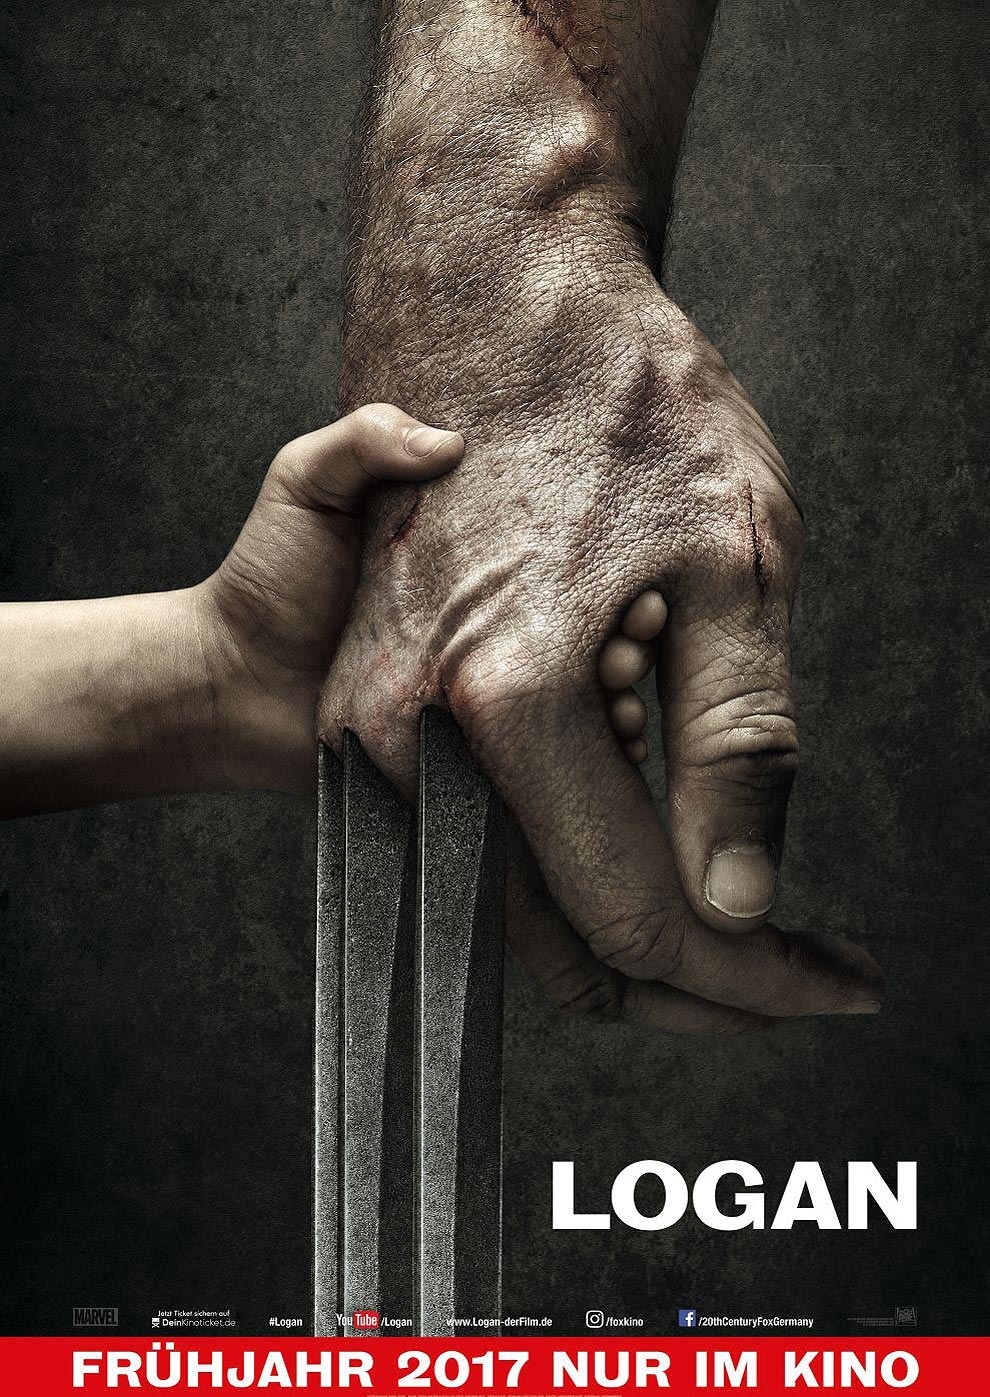 Logan - The Wolverine (Poster)